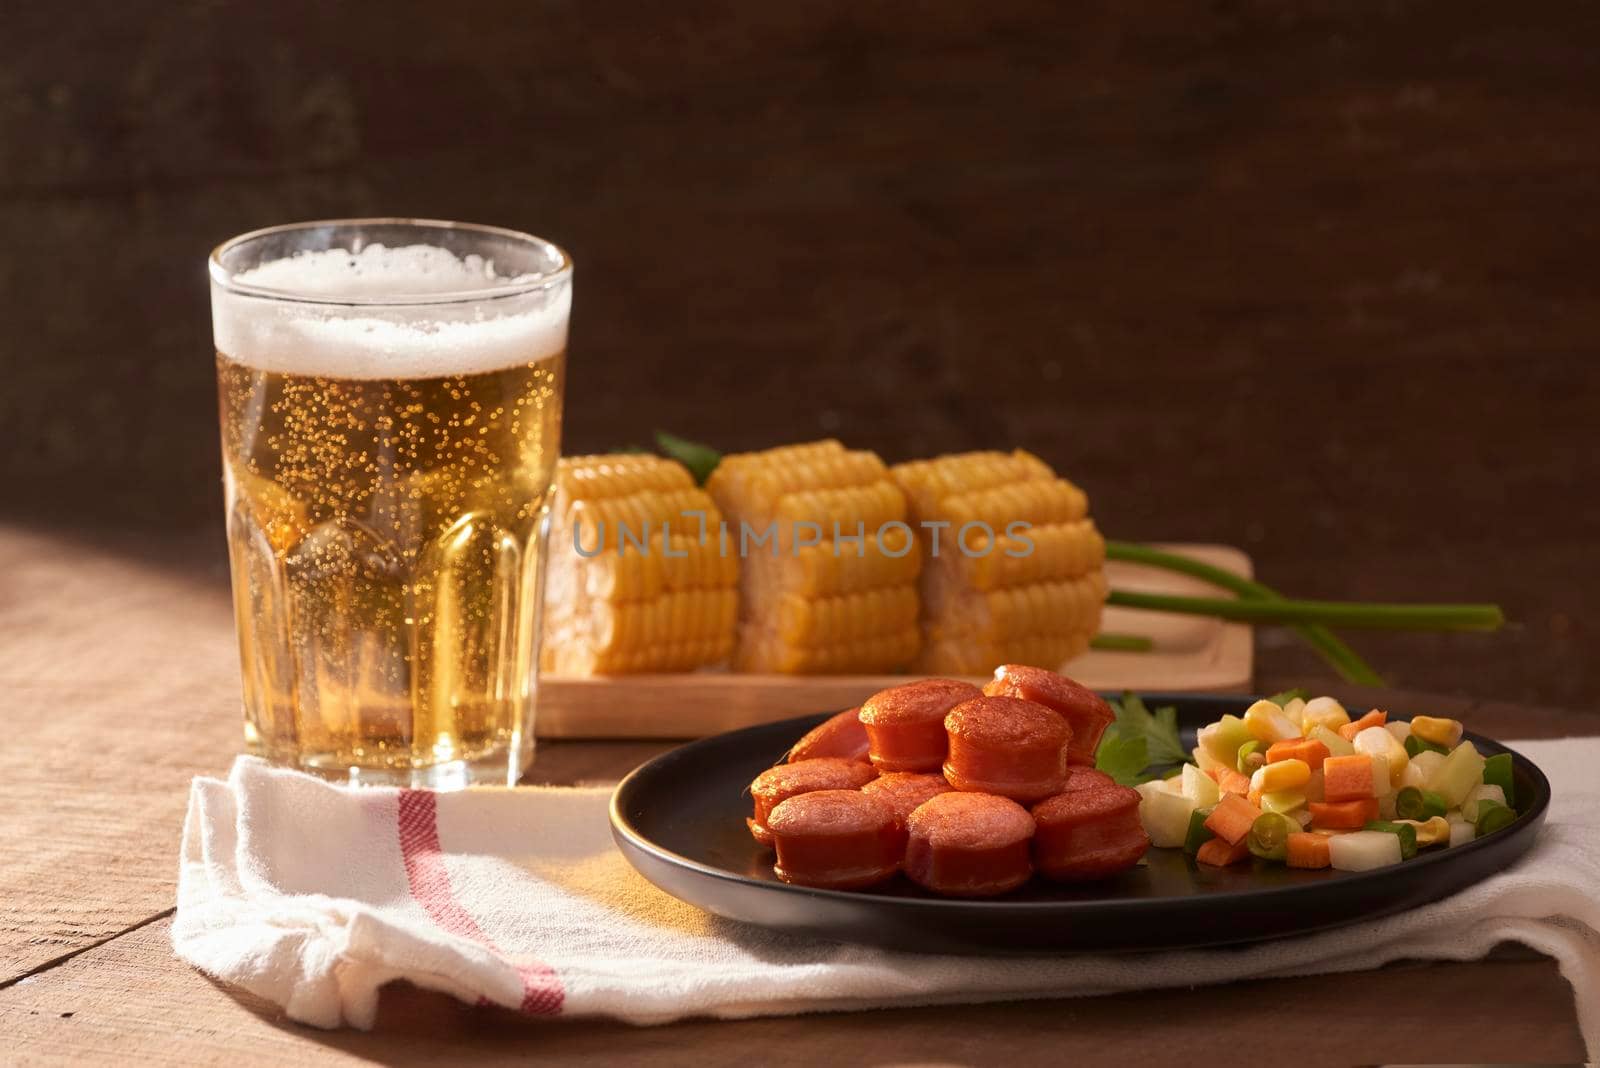 Grilled sausages with glass of beer on wooden table with copy space.